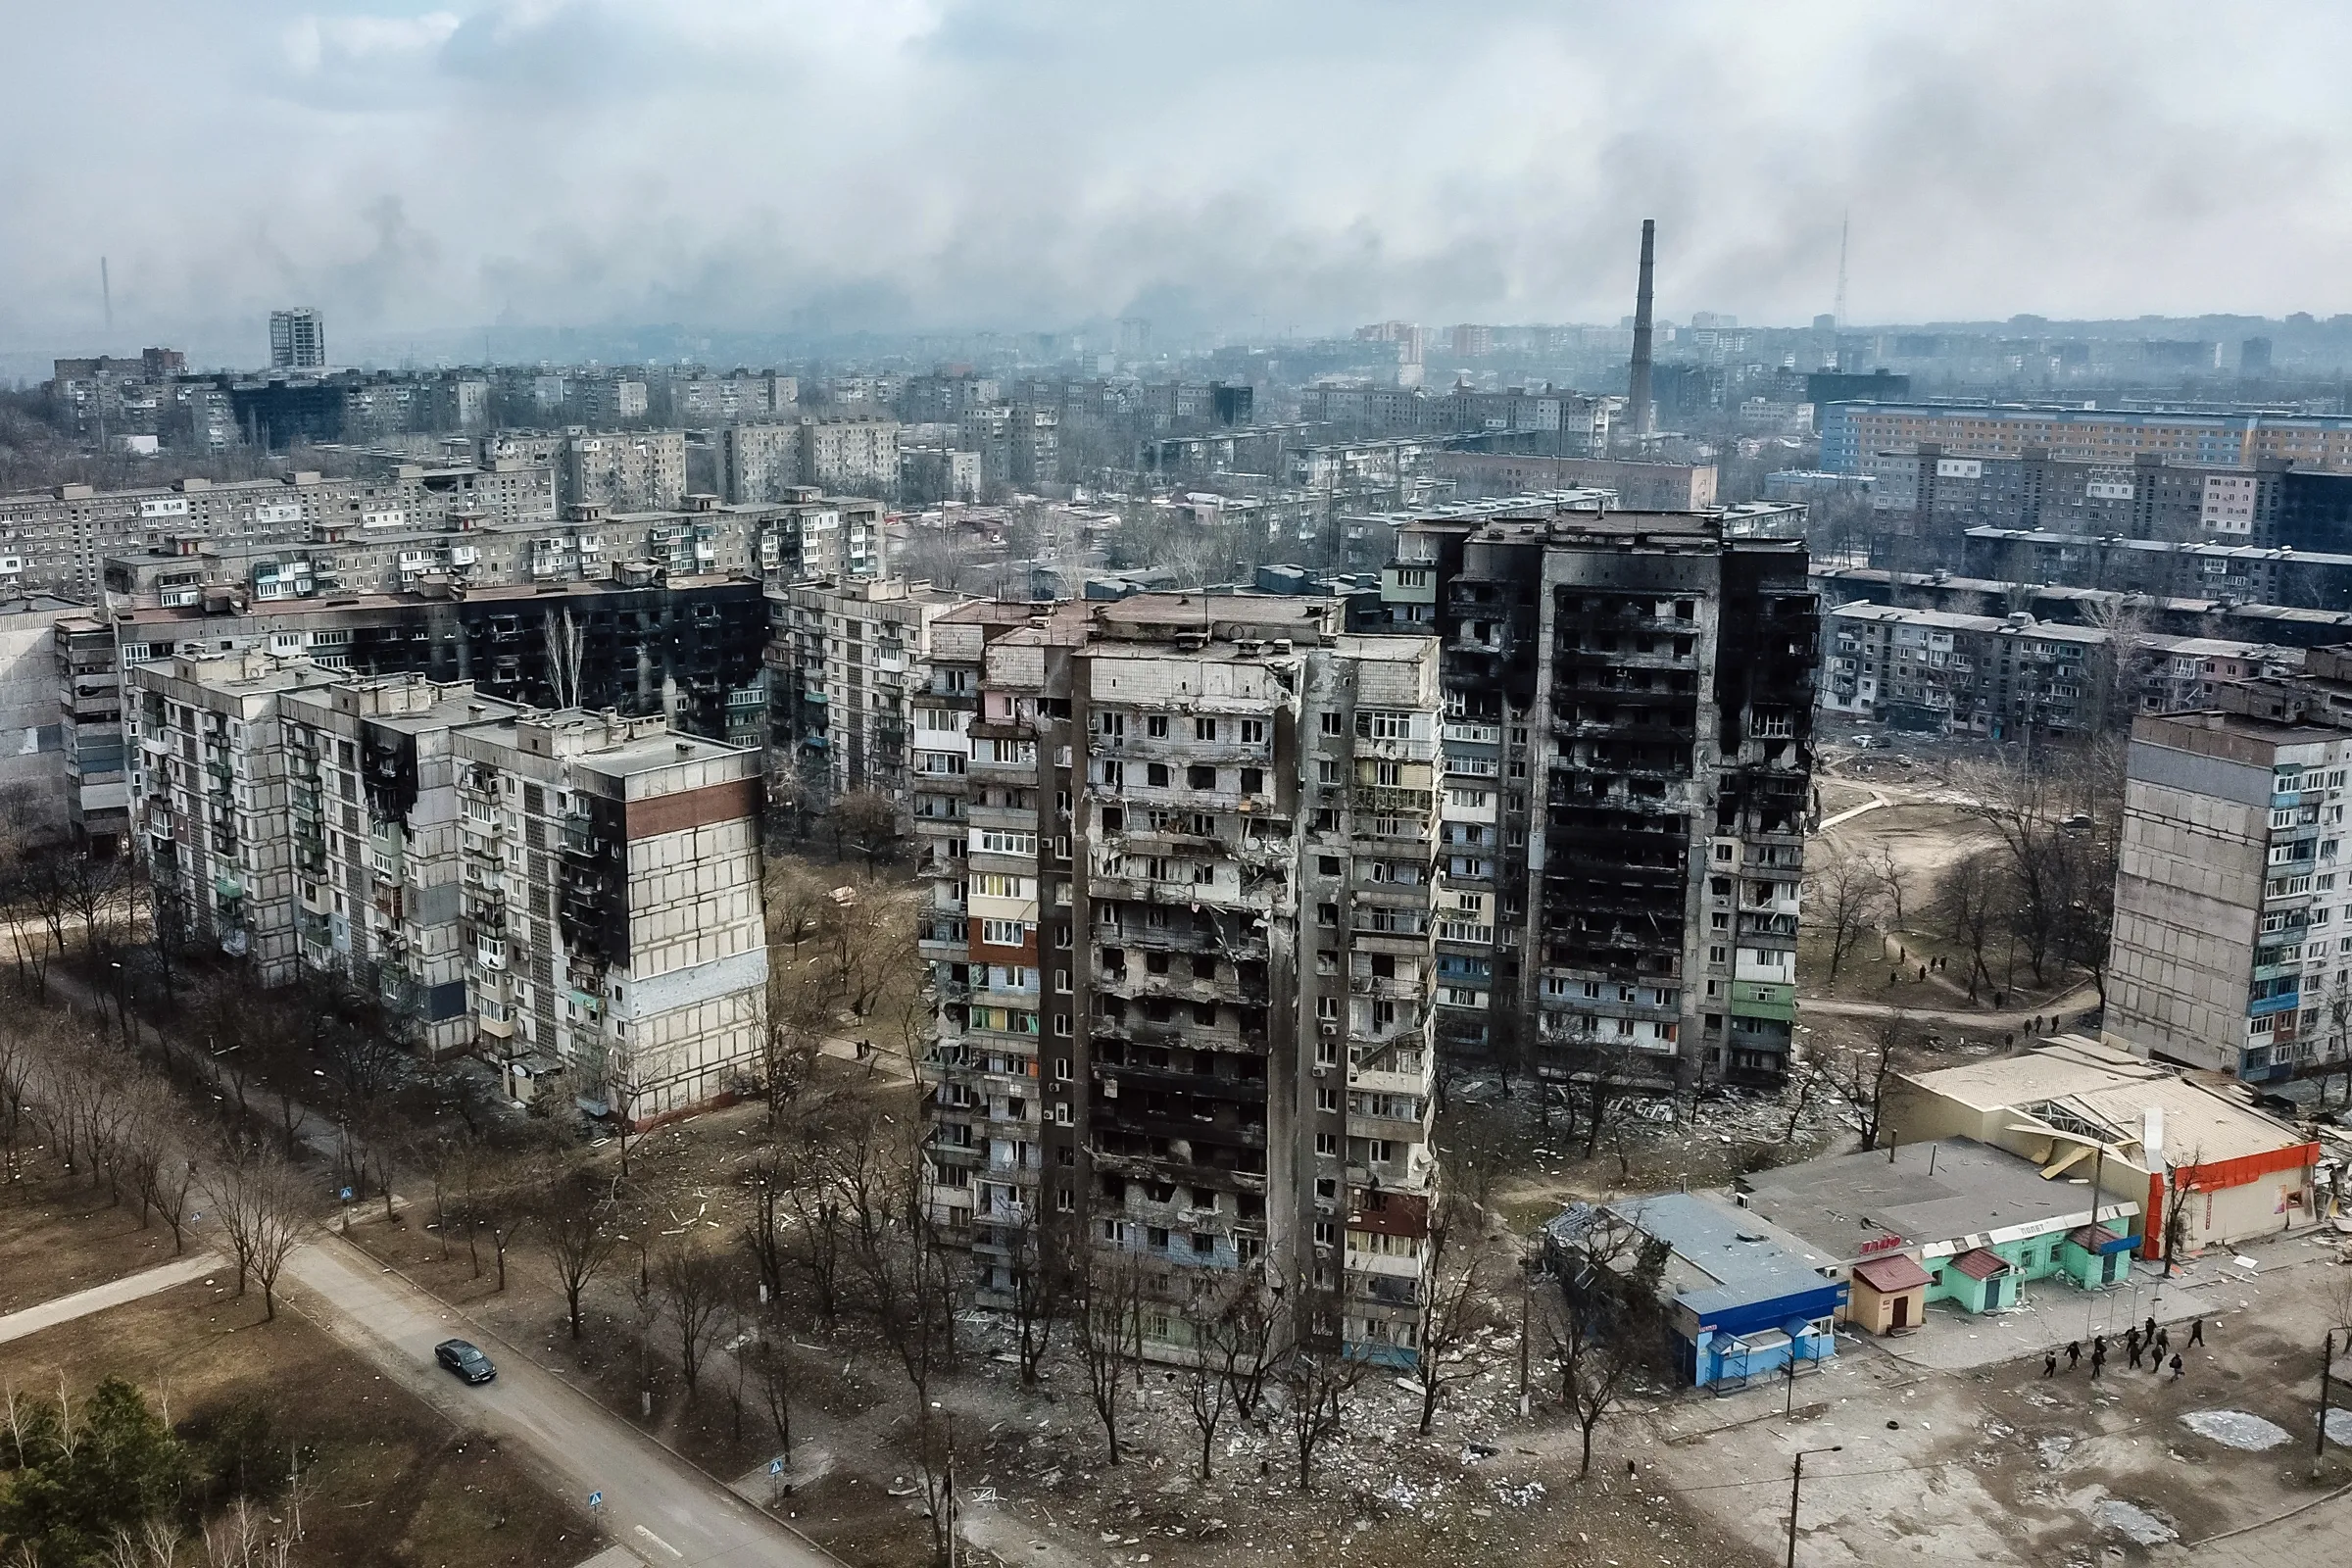 Mariupol, Ukraine, March 2022 / Why Russian Press-Tour for Foreign Media is a Provocation